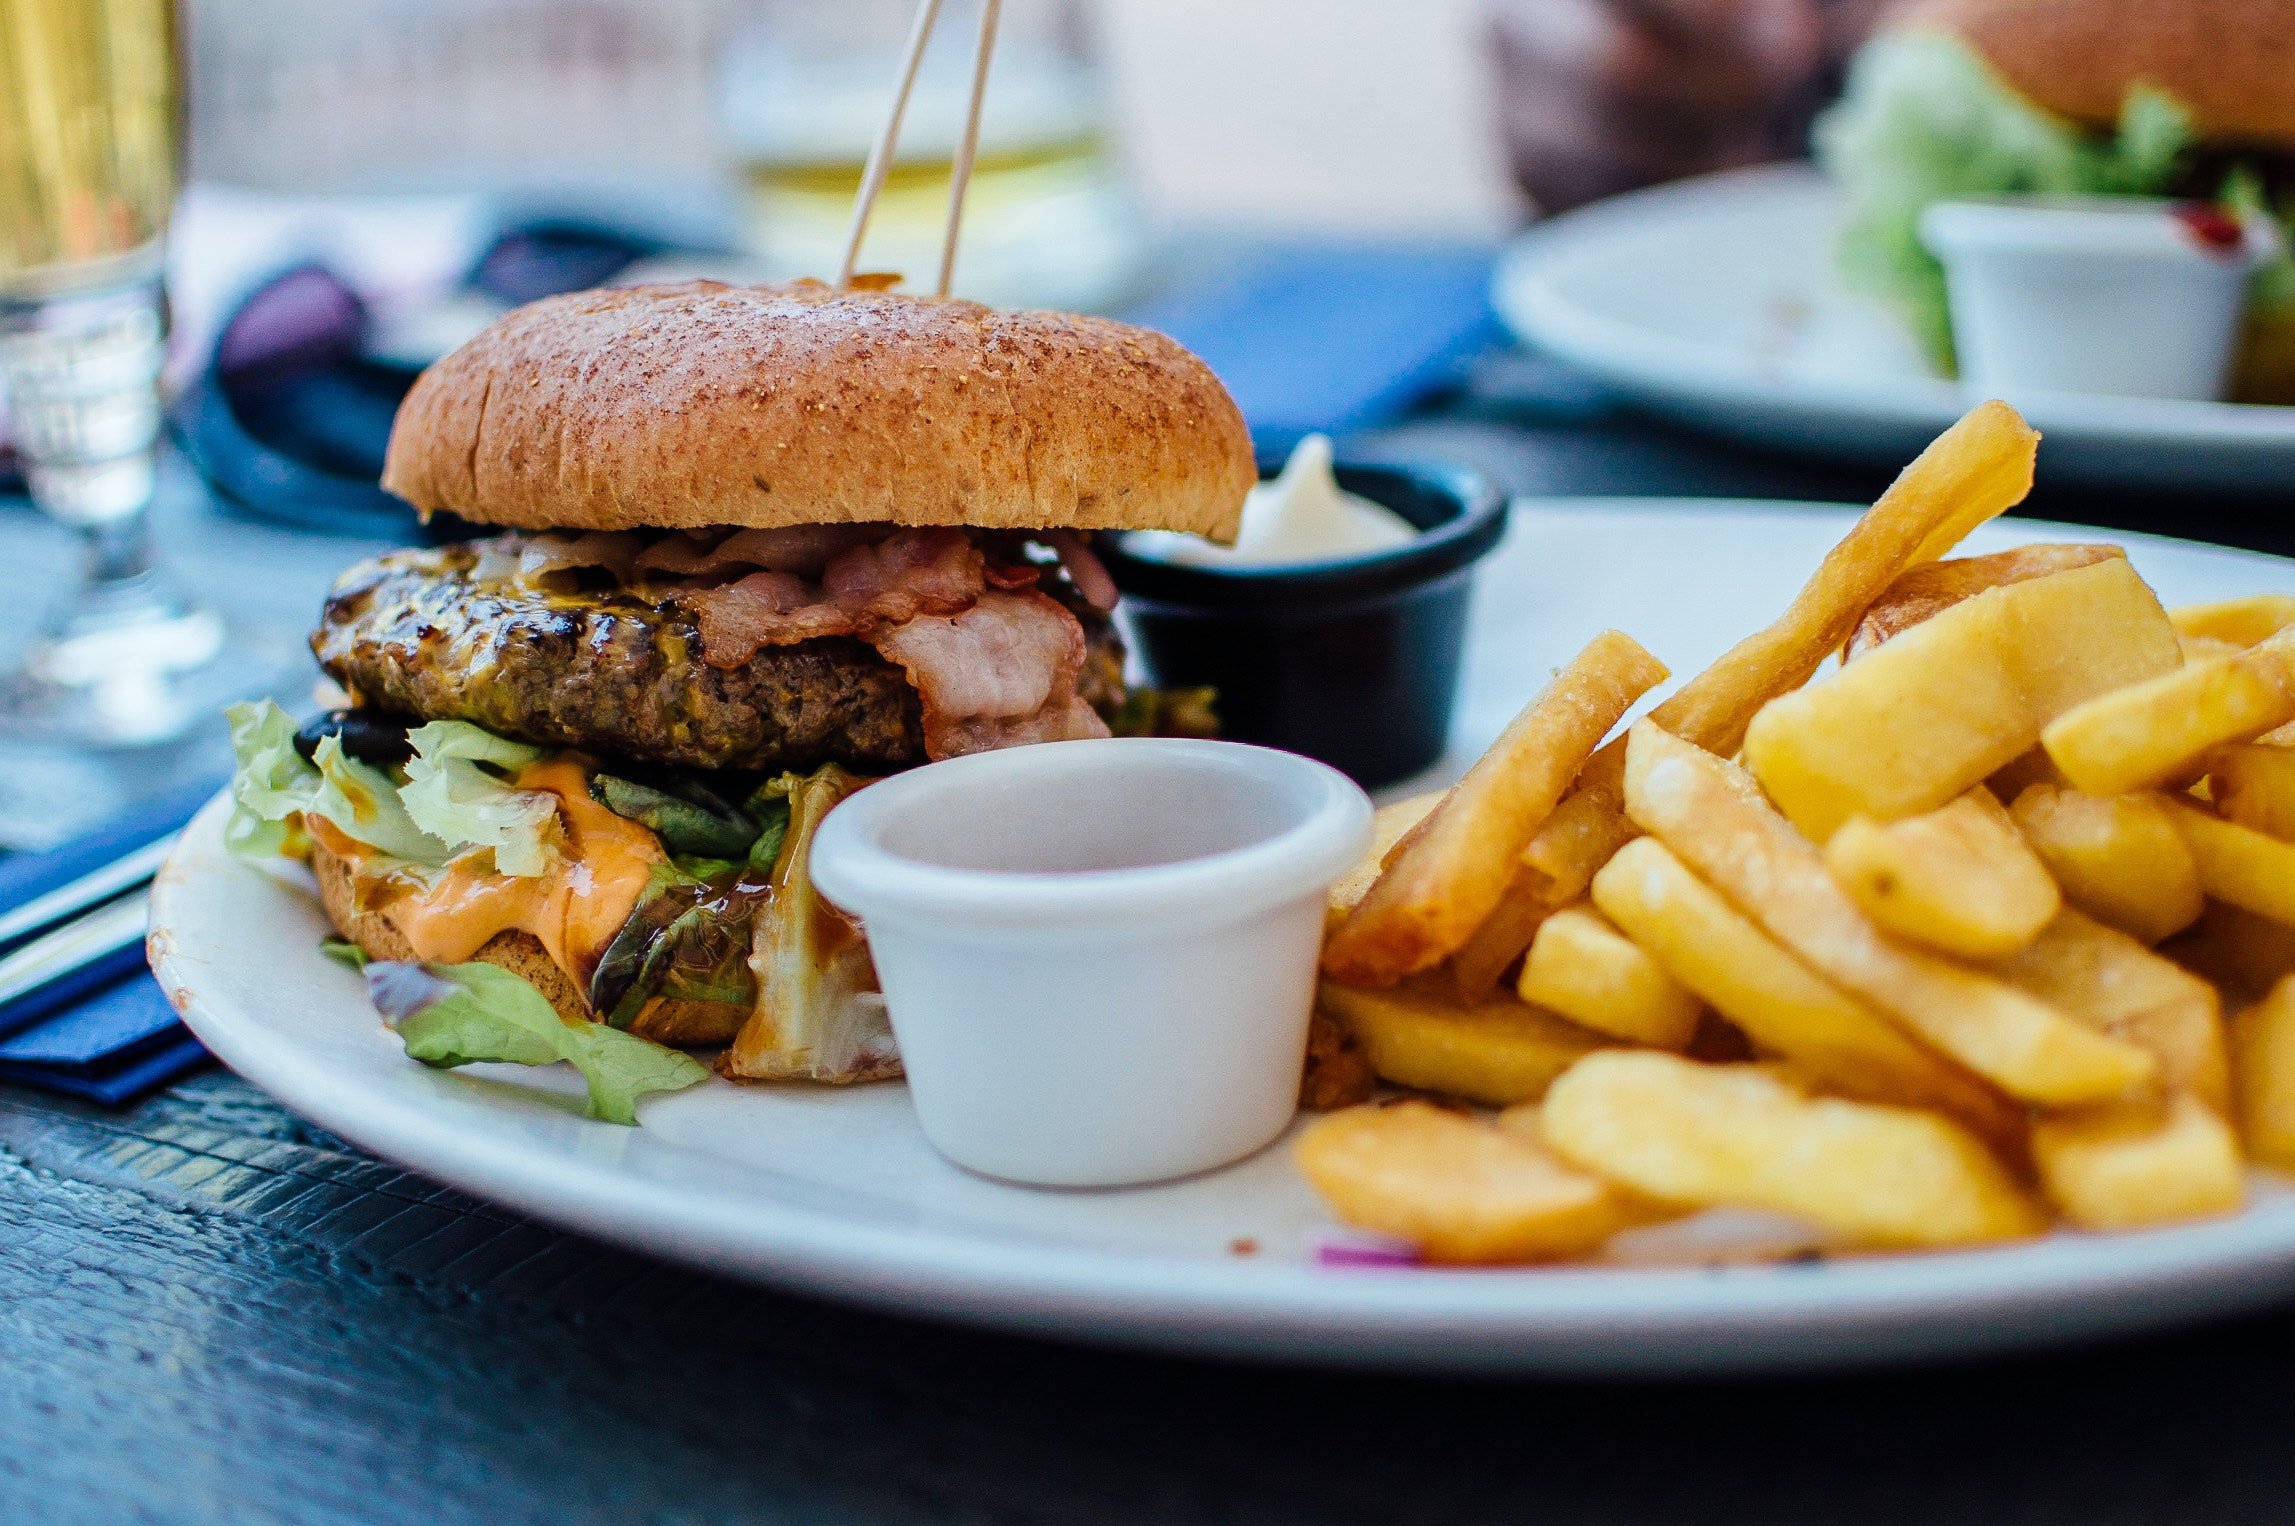 Sandra and Elliot ordered bacon cheeseburgers from the restaurant. | Source: Pexels